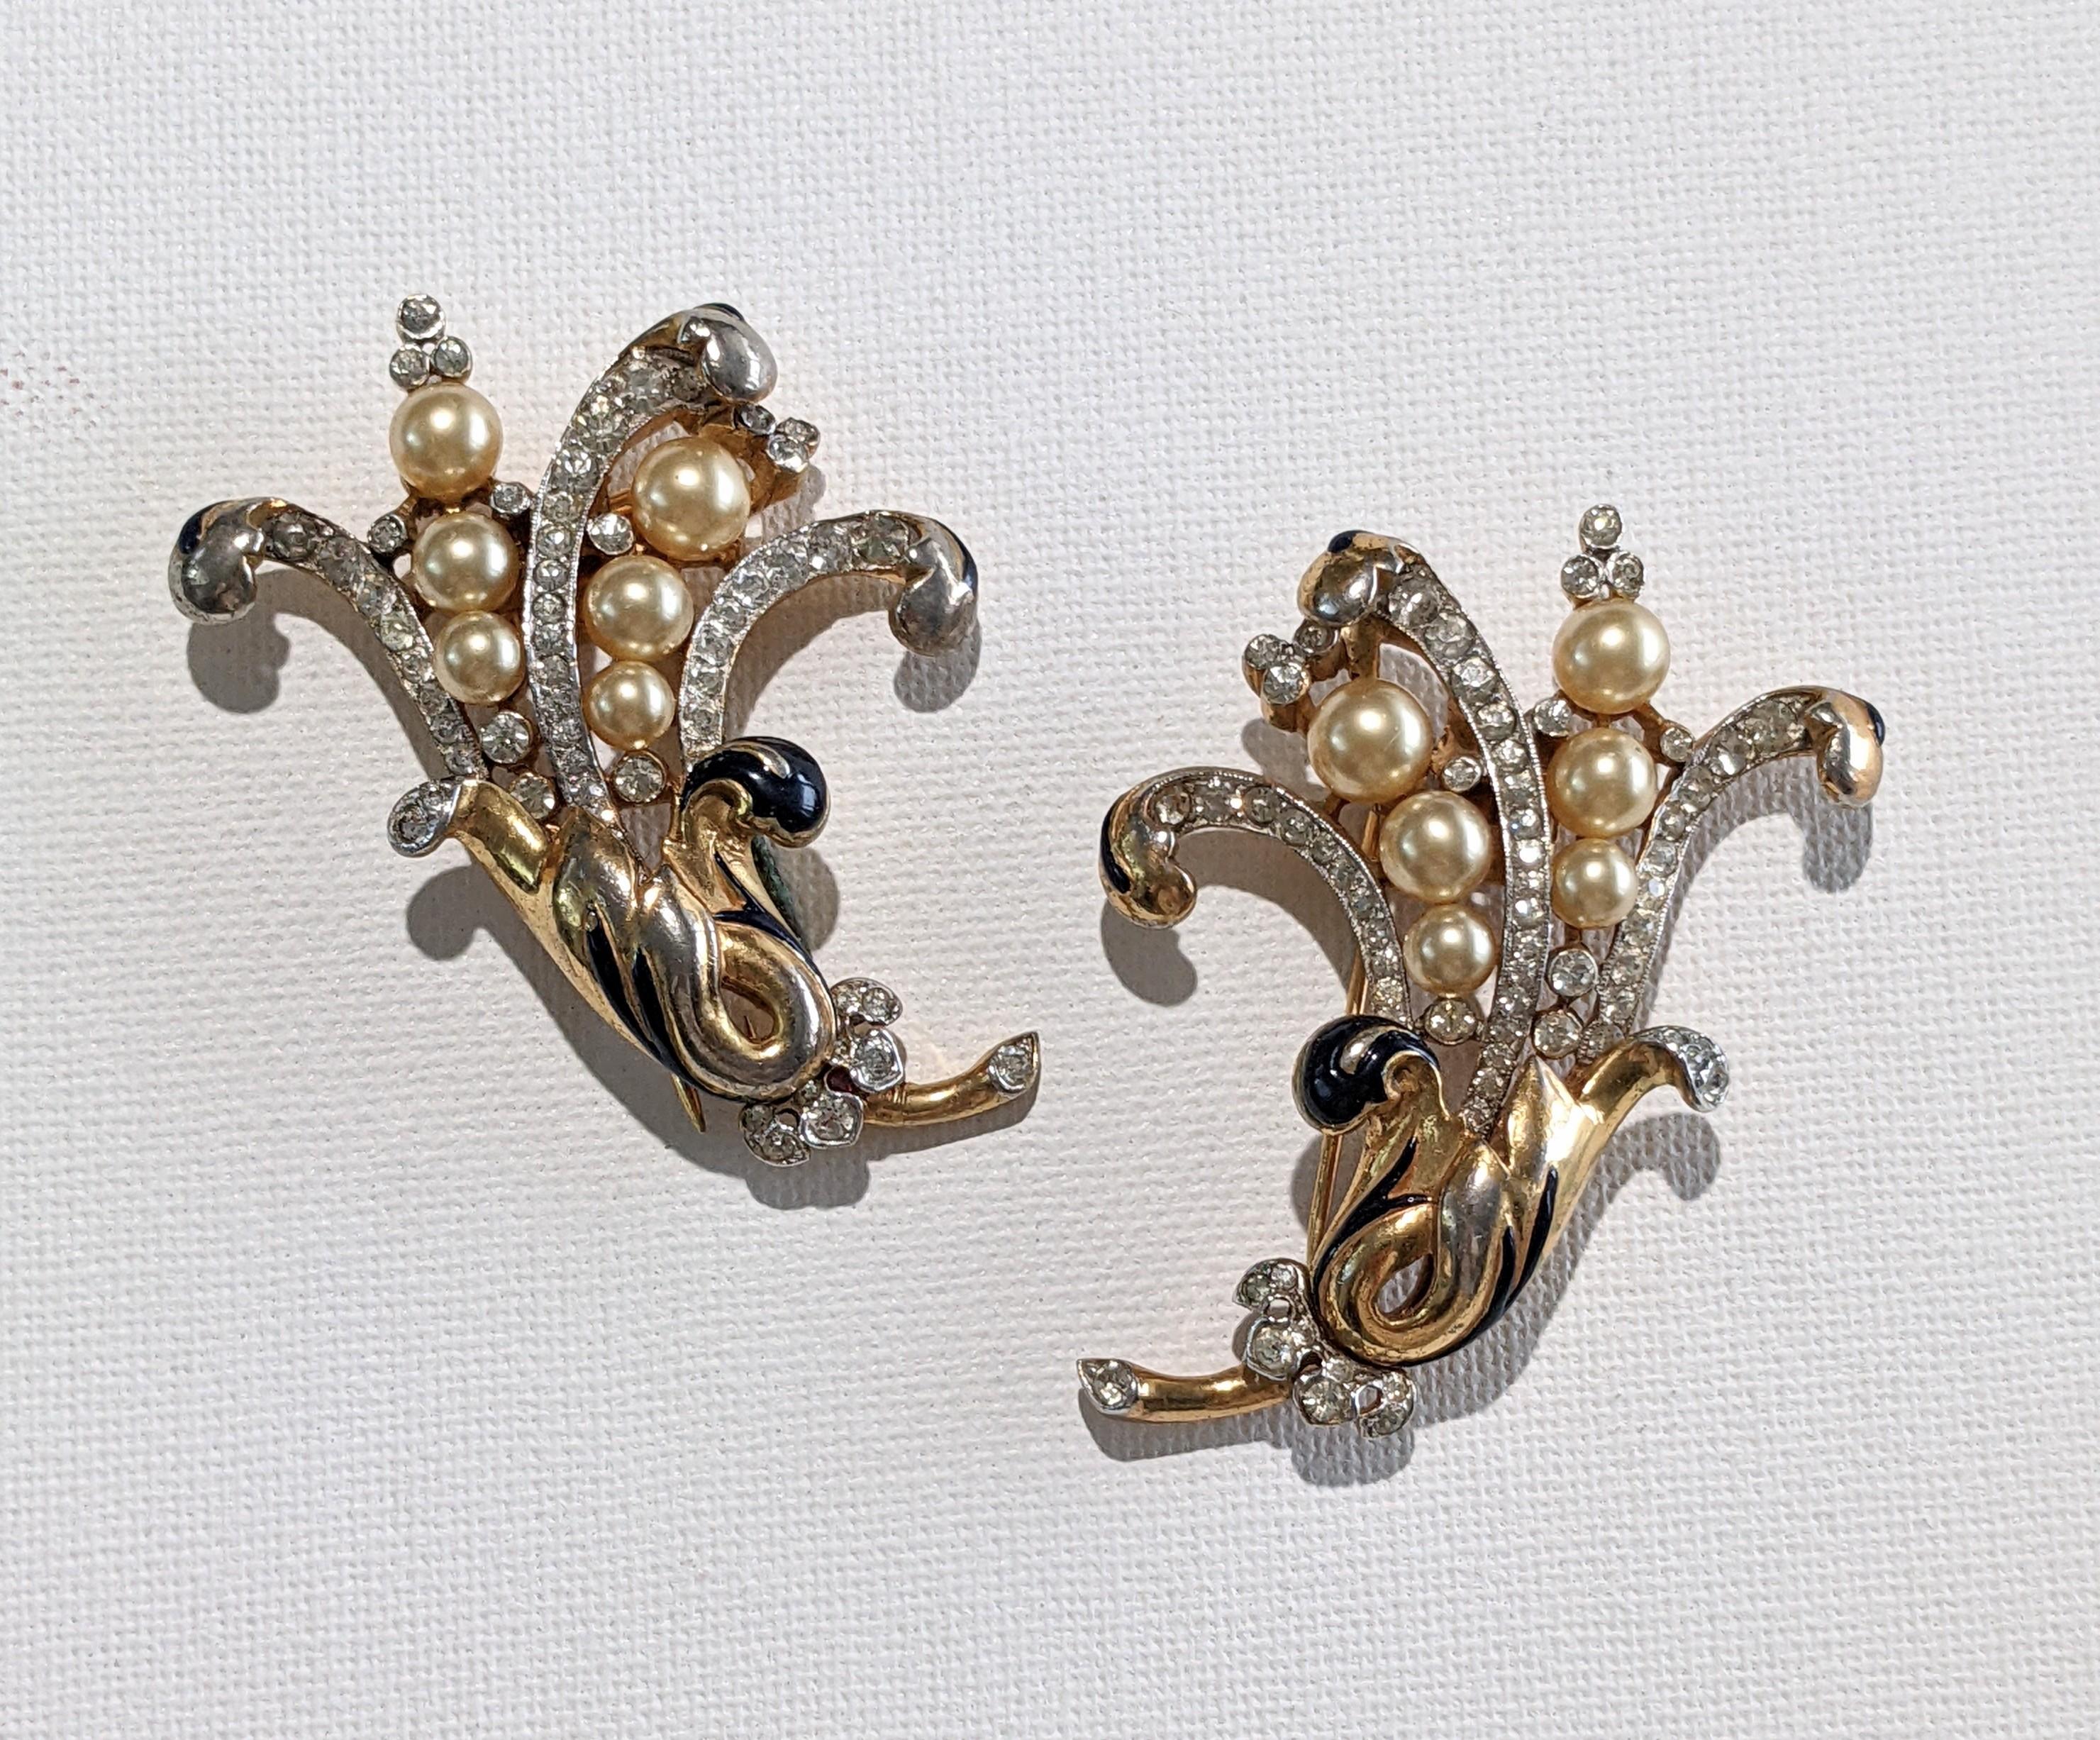 Rare pair of elegant Trifari Eugenie Clips from 1940 in gilt metal, enamel with faux pearls. Alfred Phillipe design. 1930's USA.  2.25